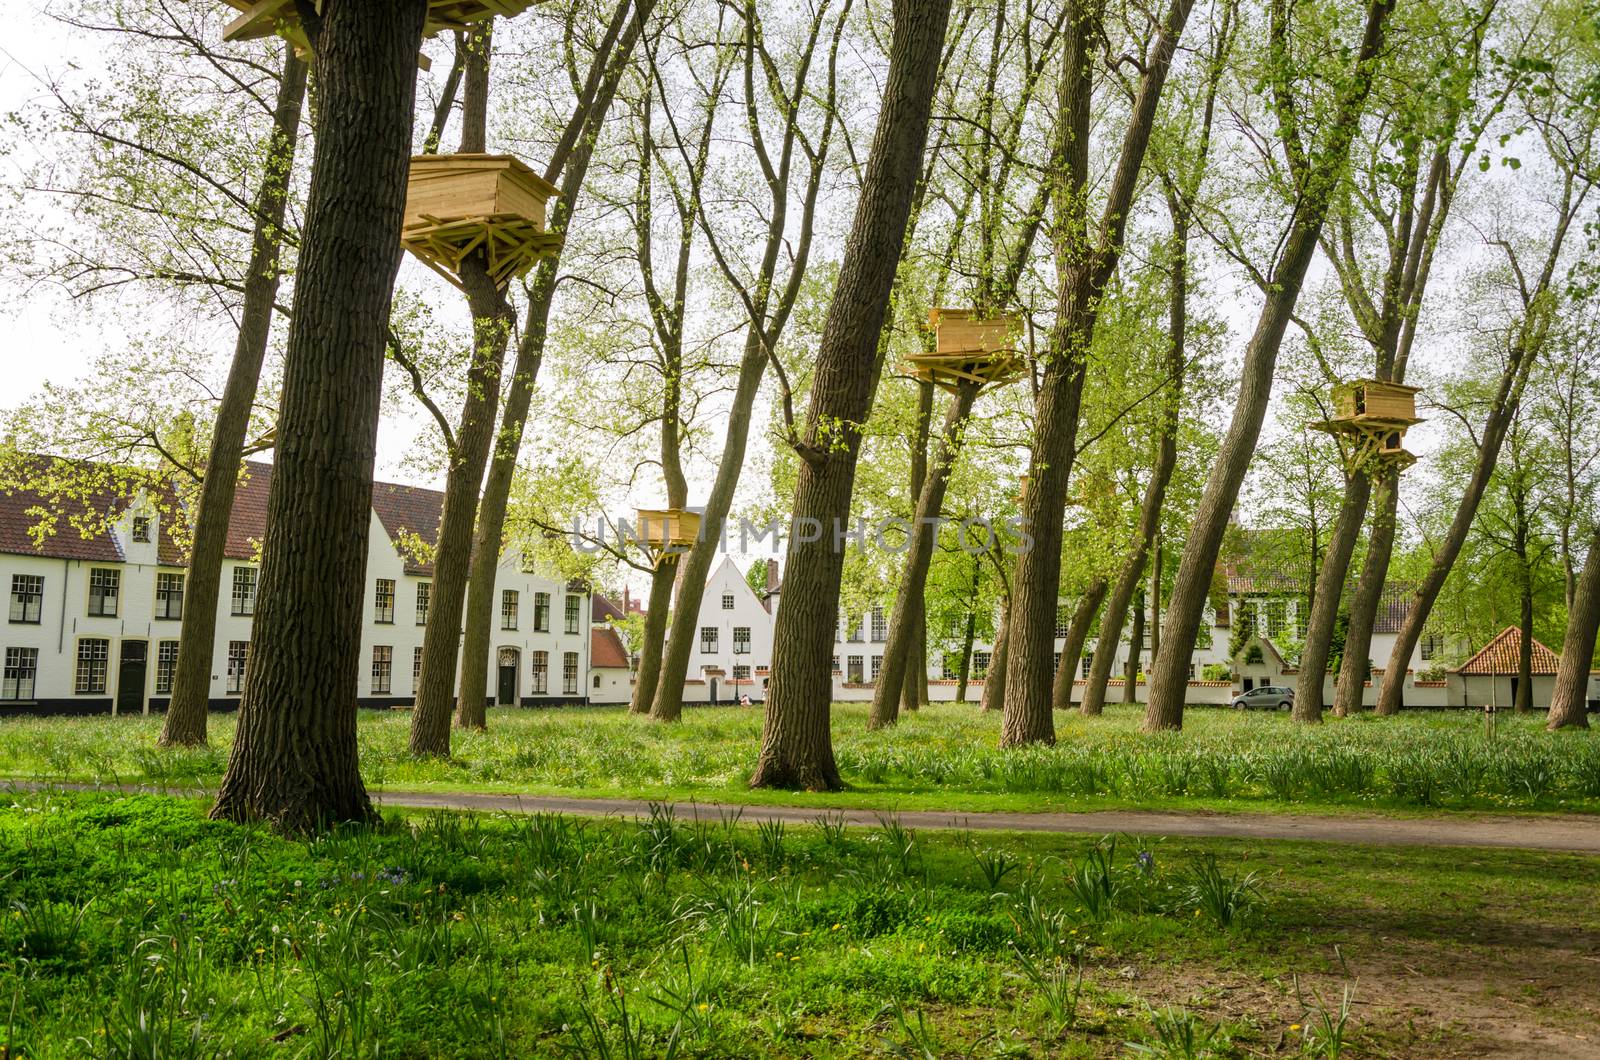 Tree Houses in the Beguinage (Begijnhof) in Bruges by siraanamwong